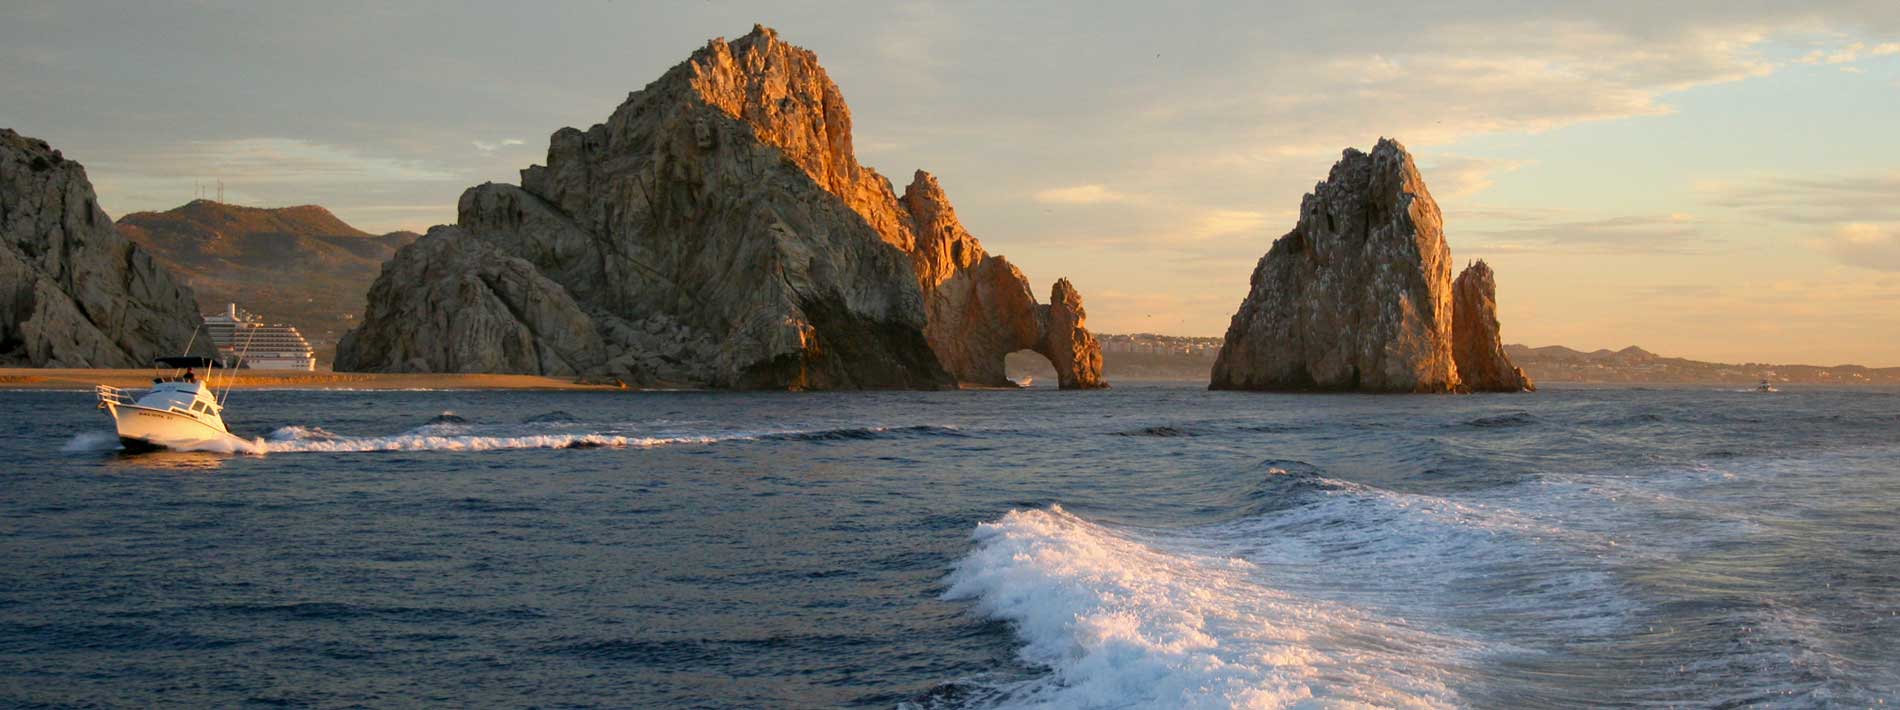 Fishing boats pass by Land's End in Cabo San Lucas